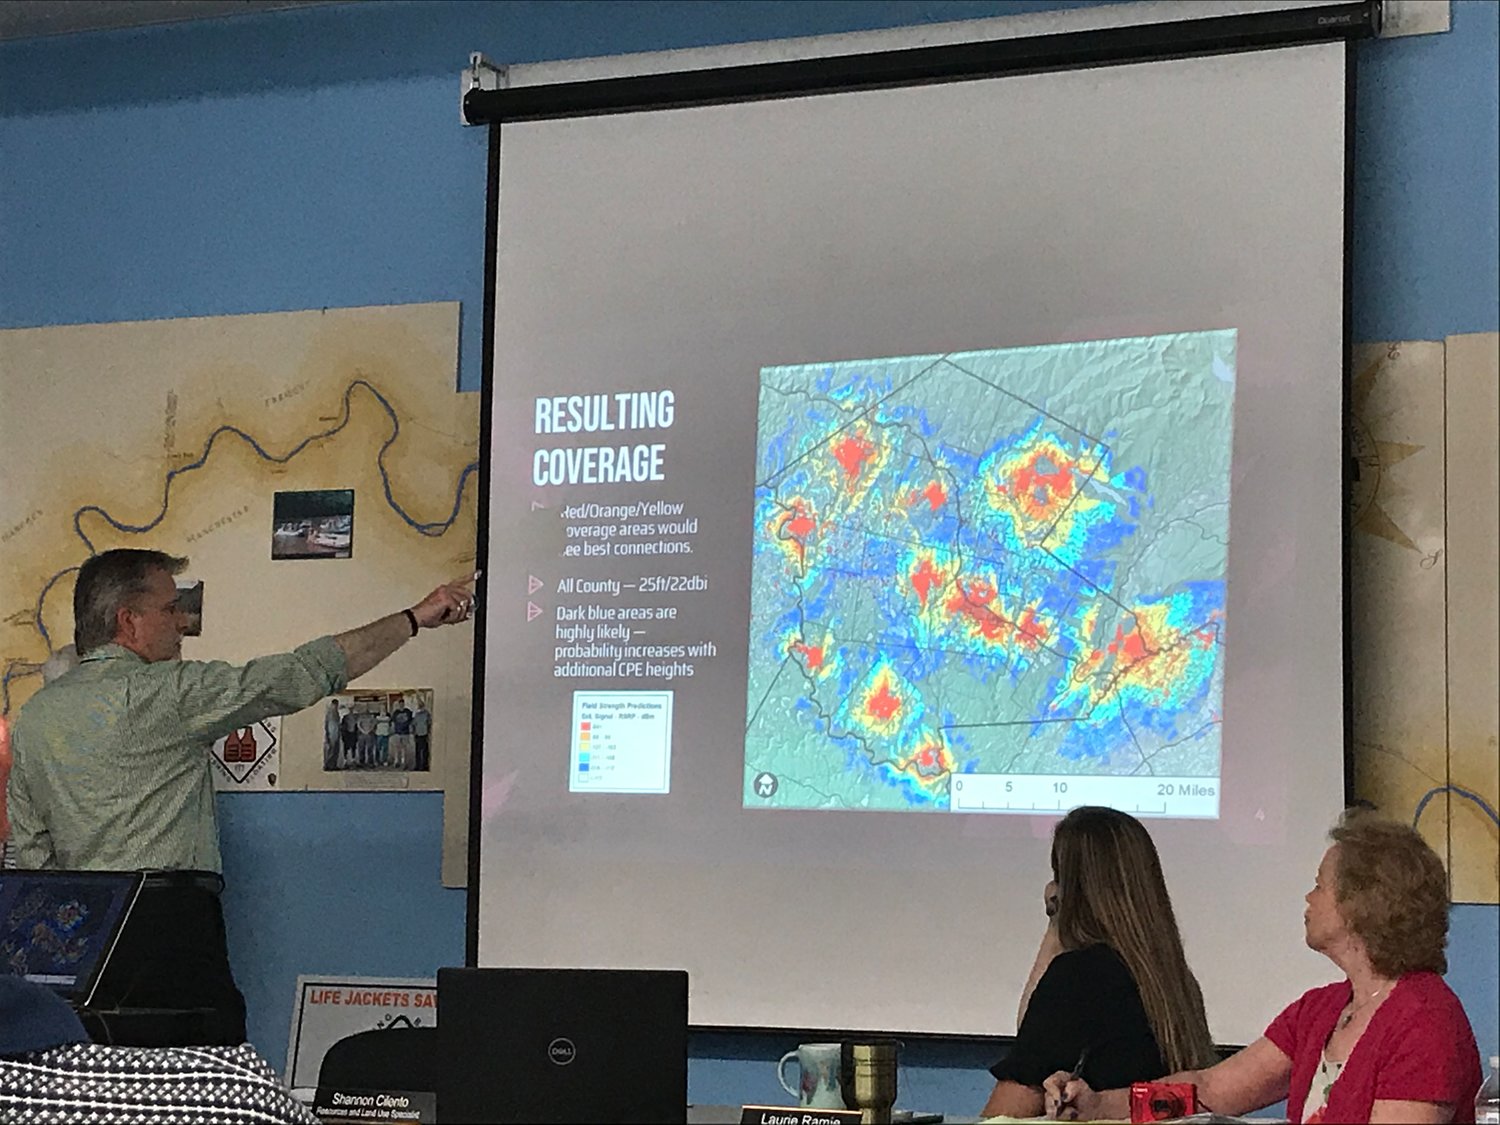 Lorne D. Green displays a heatmap of potential broadband coverage during a presentation on broadband in Sullivan County.